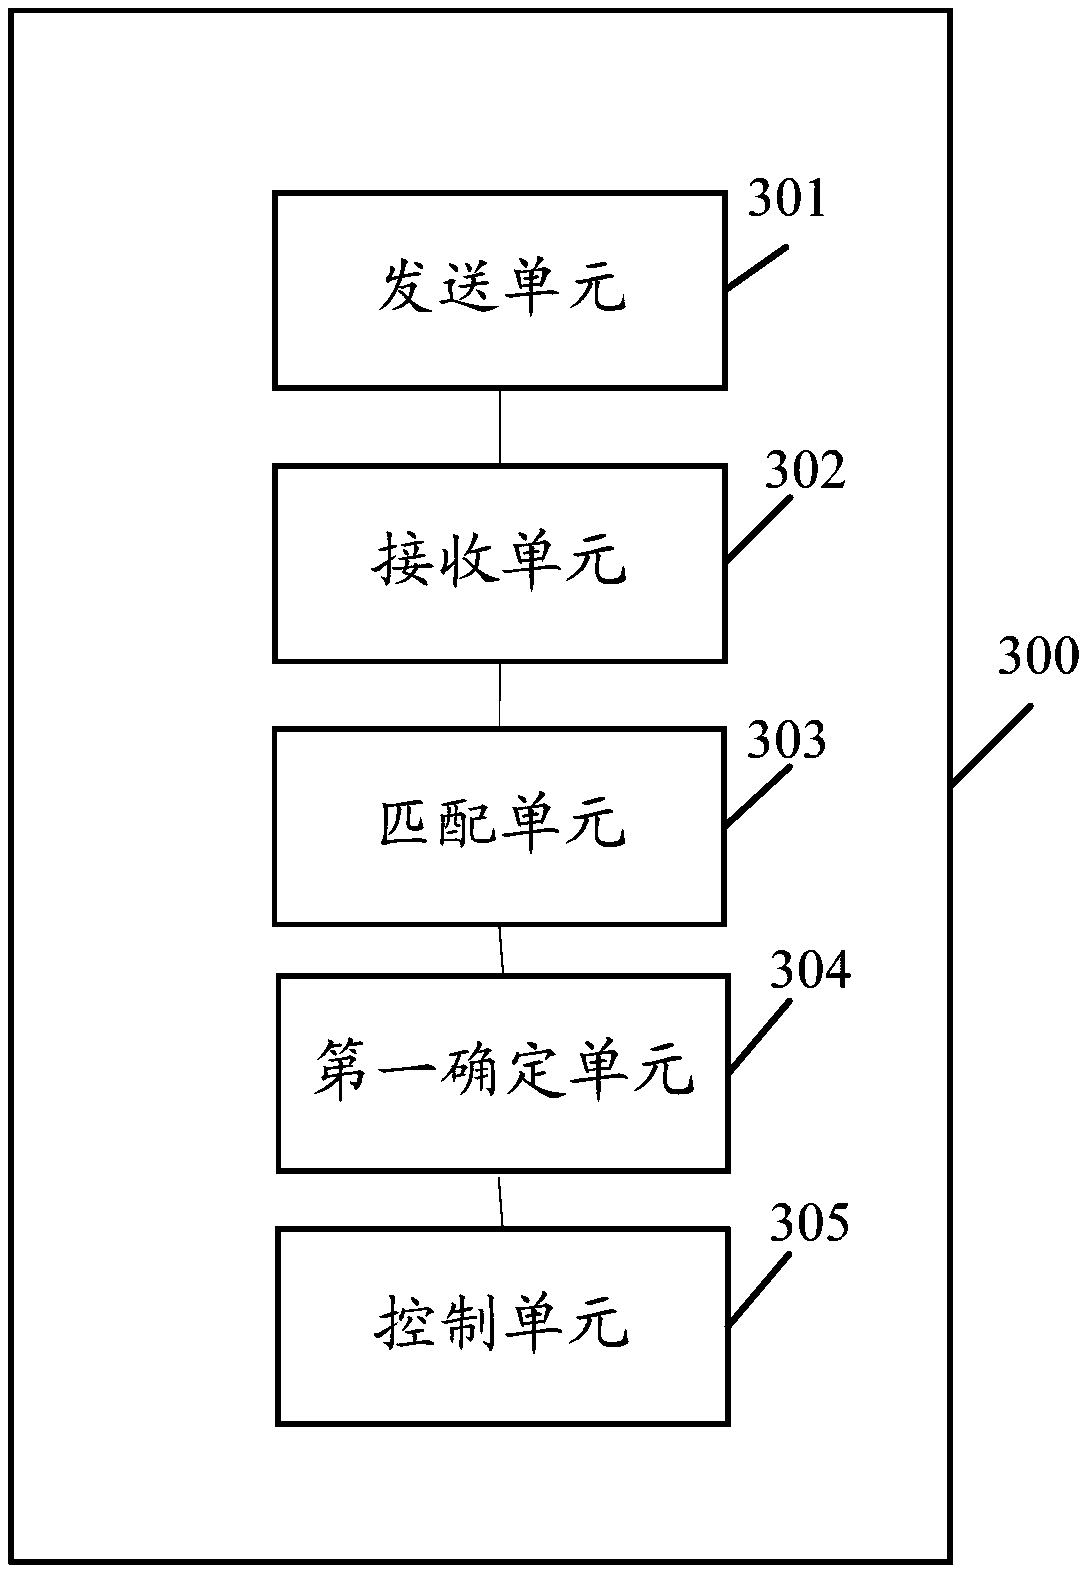 Opening and closing device control method and related server